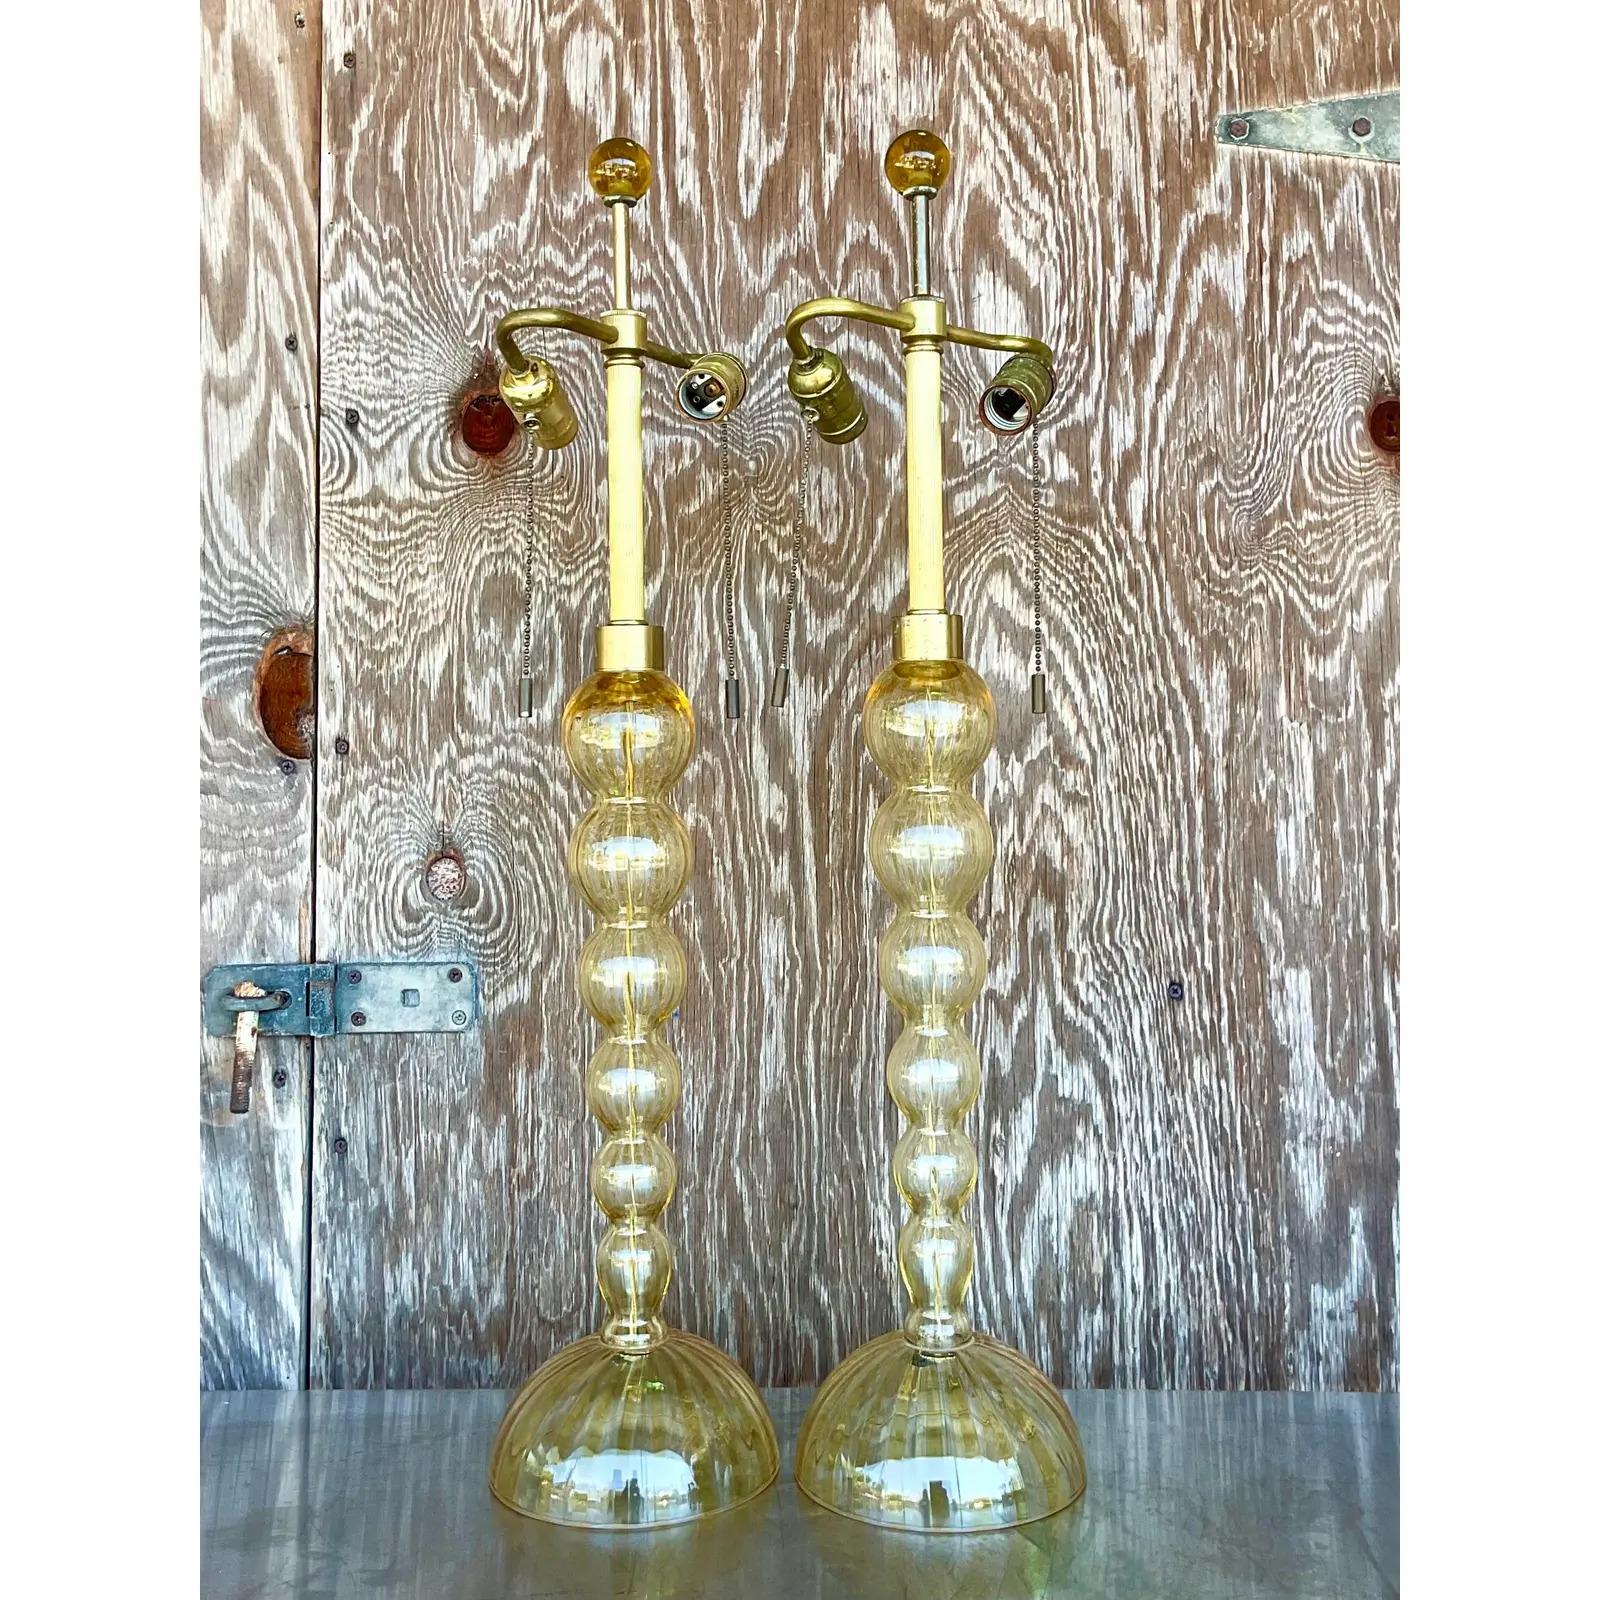 Fantastic vintage pair of Murano glass lamps. The iconic glass ball bearing shape. Beautiful striped glass that is signed on the base. Twisted raw silk cord. Acquired from a Palm Beach estate.

The lamps are in great vintage condition. Minor